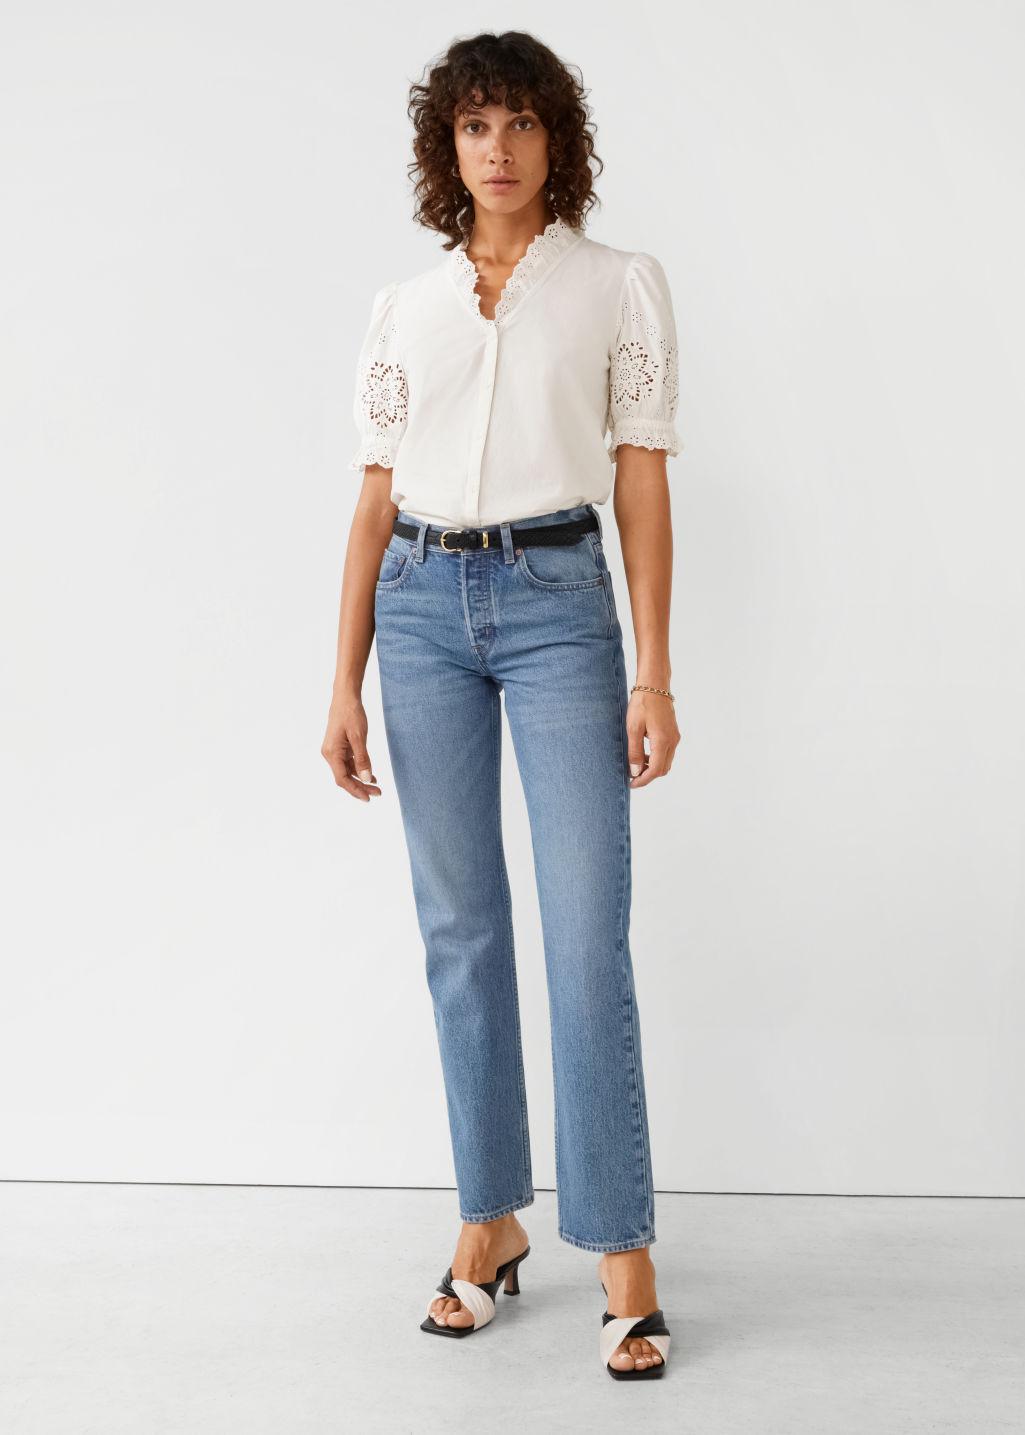 & Other Stories Frilled Embroidery Blouse in White | Lyst Canada